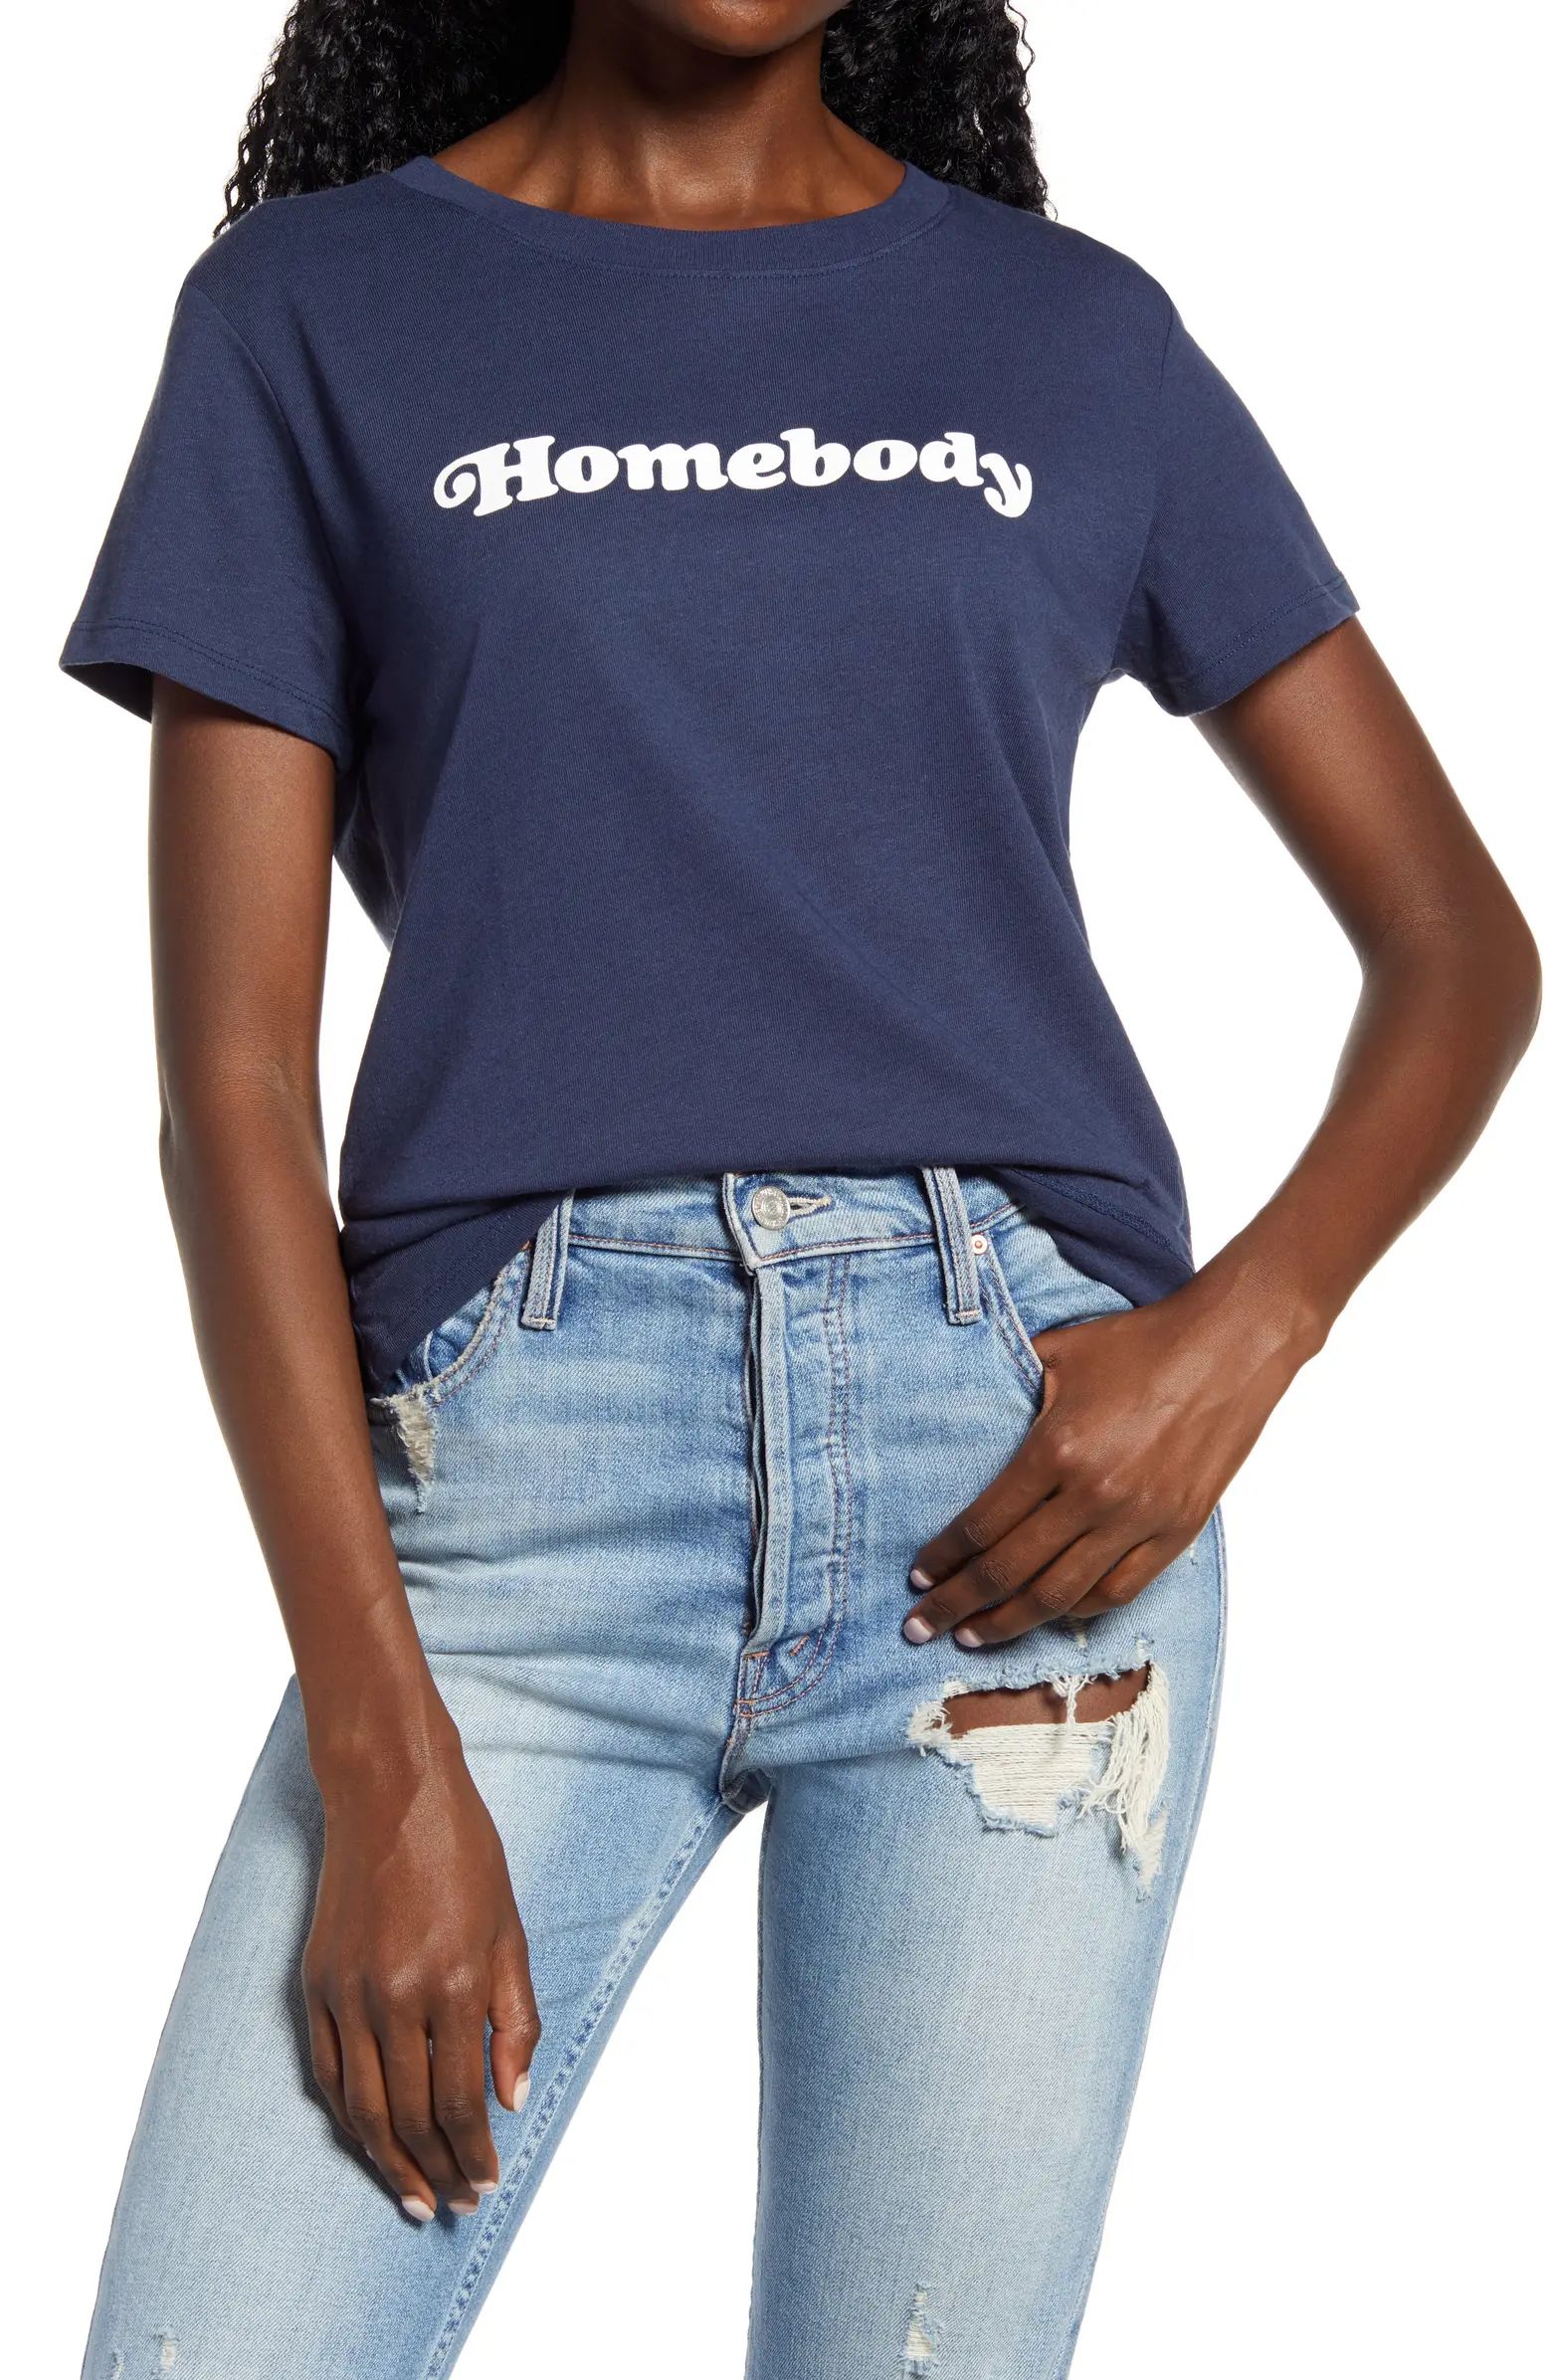 Homebody Graphic Tee | Nordstrom